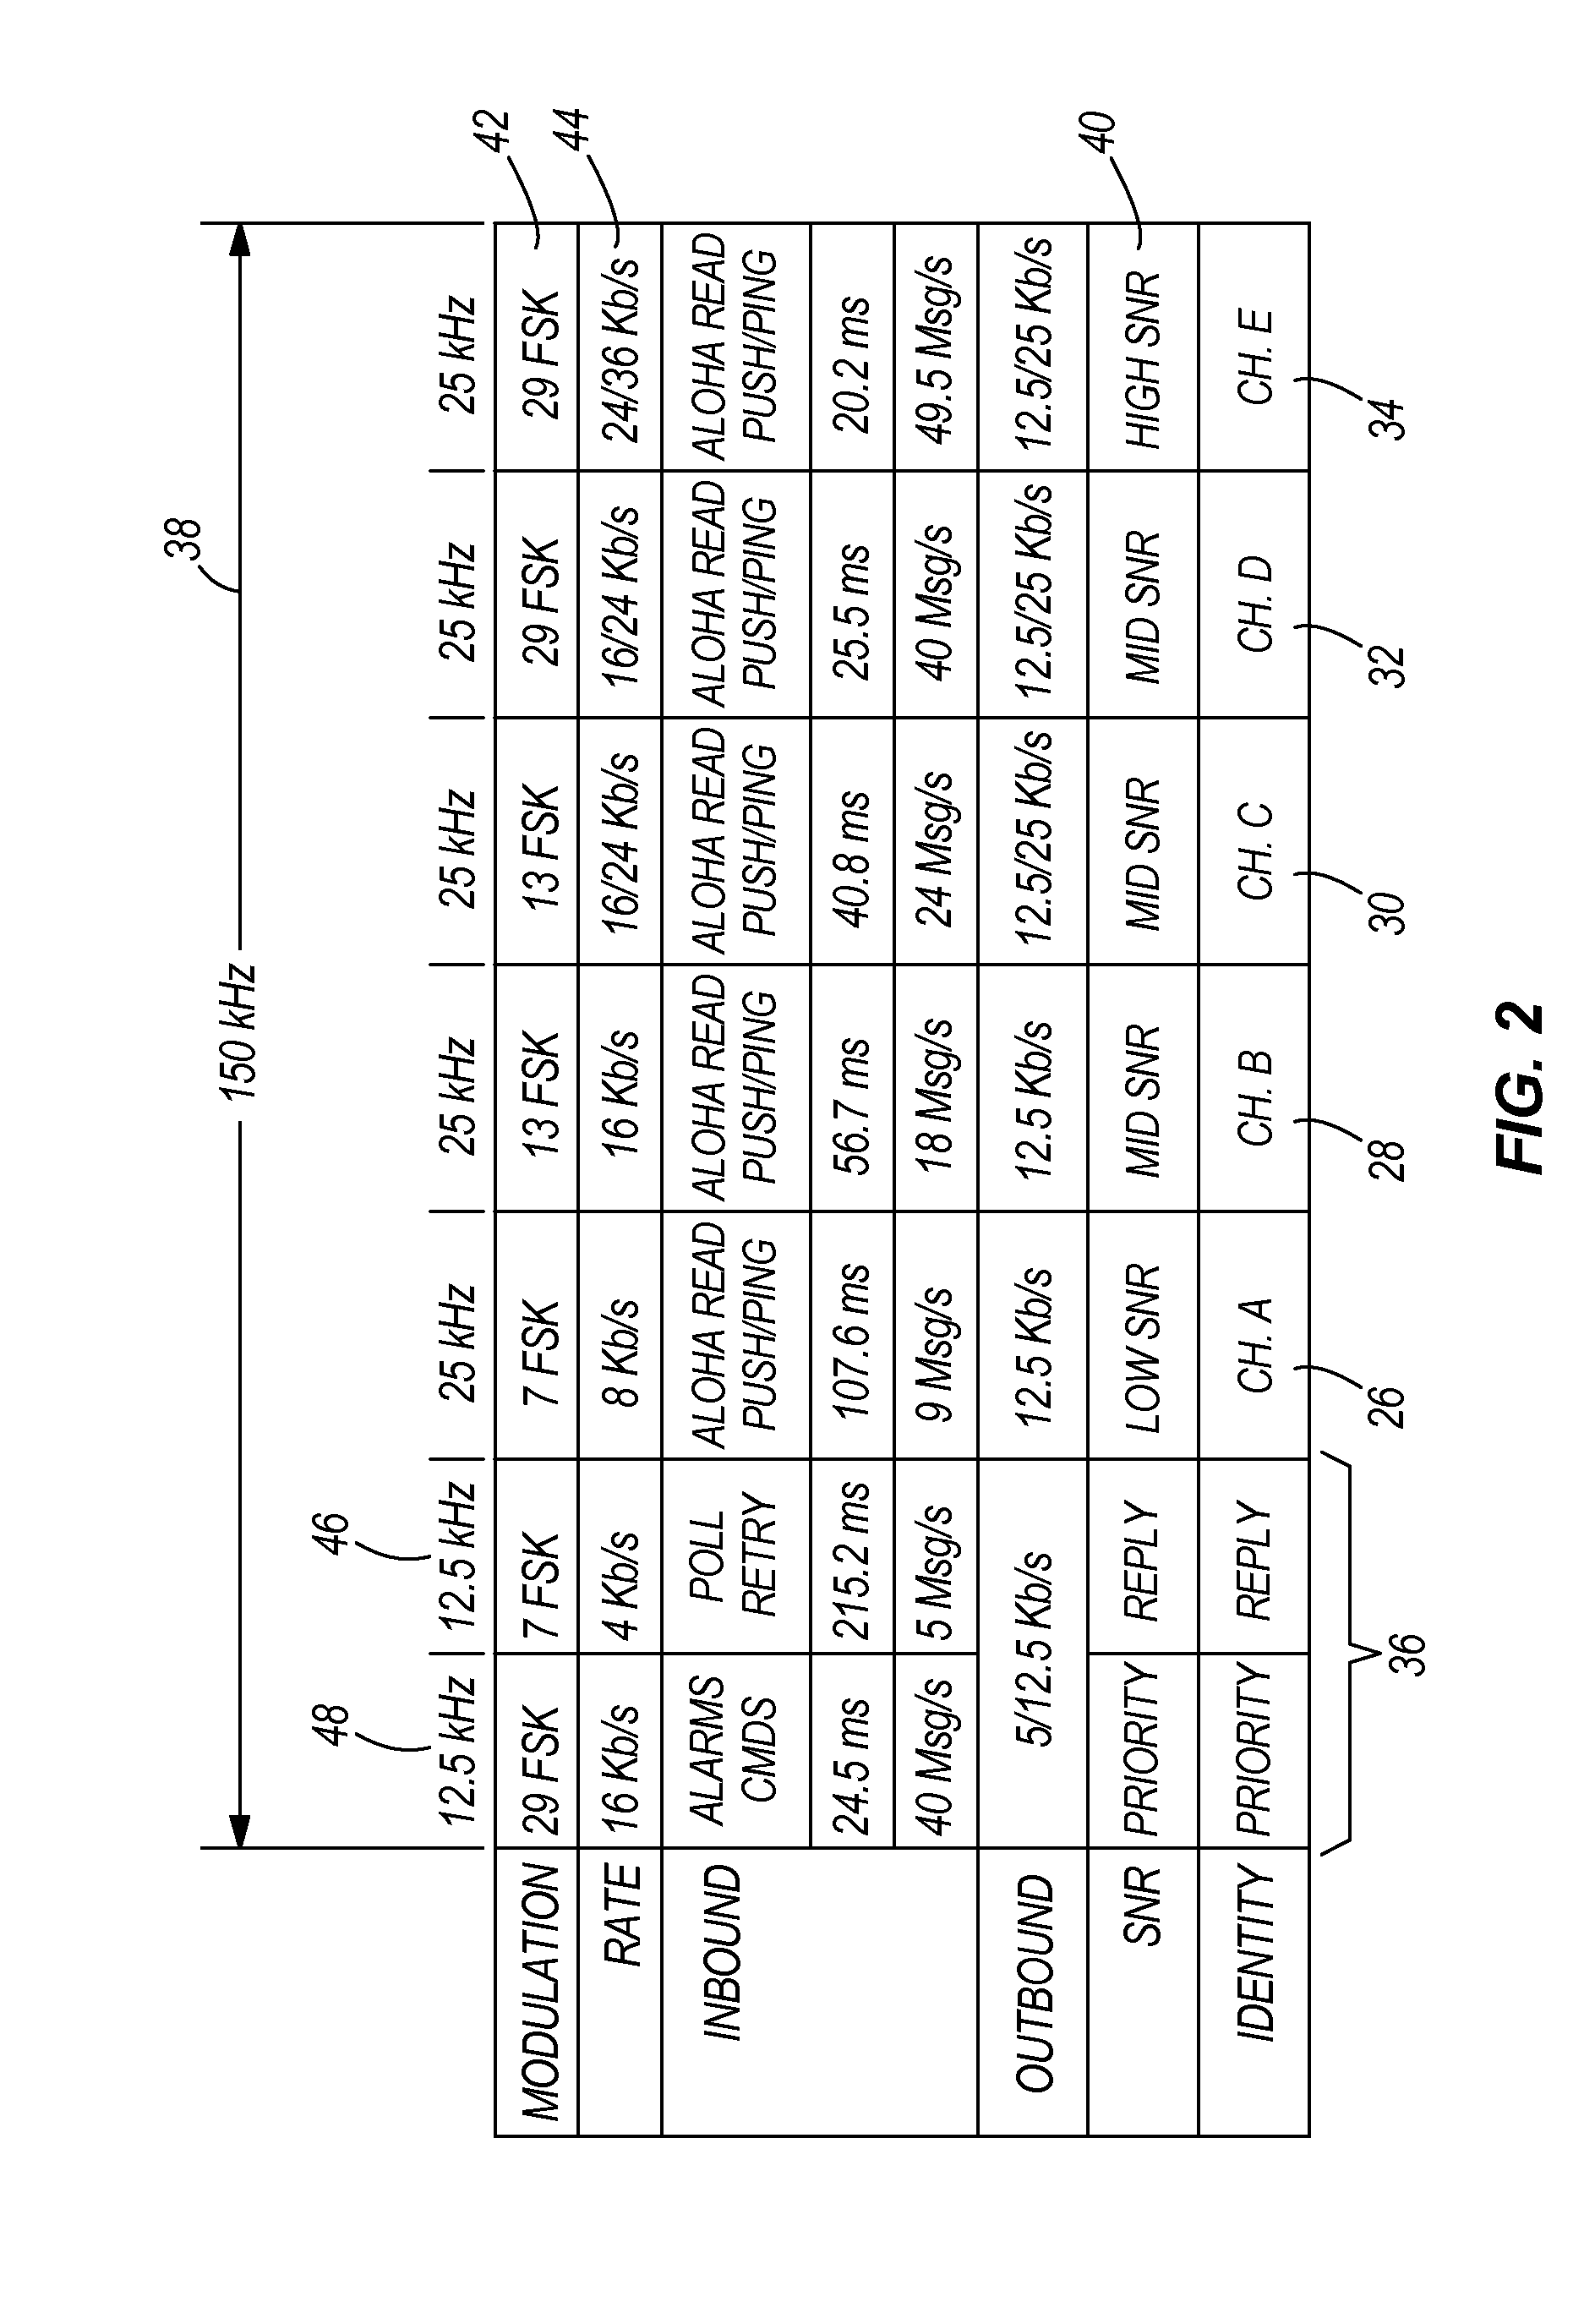 Multi-band channel capacity for meter network